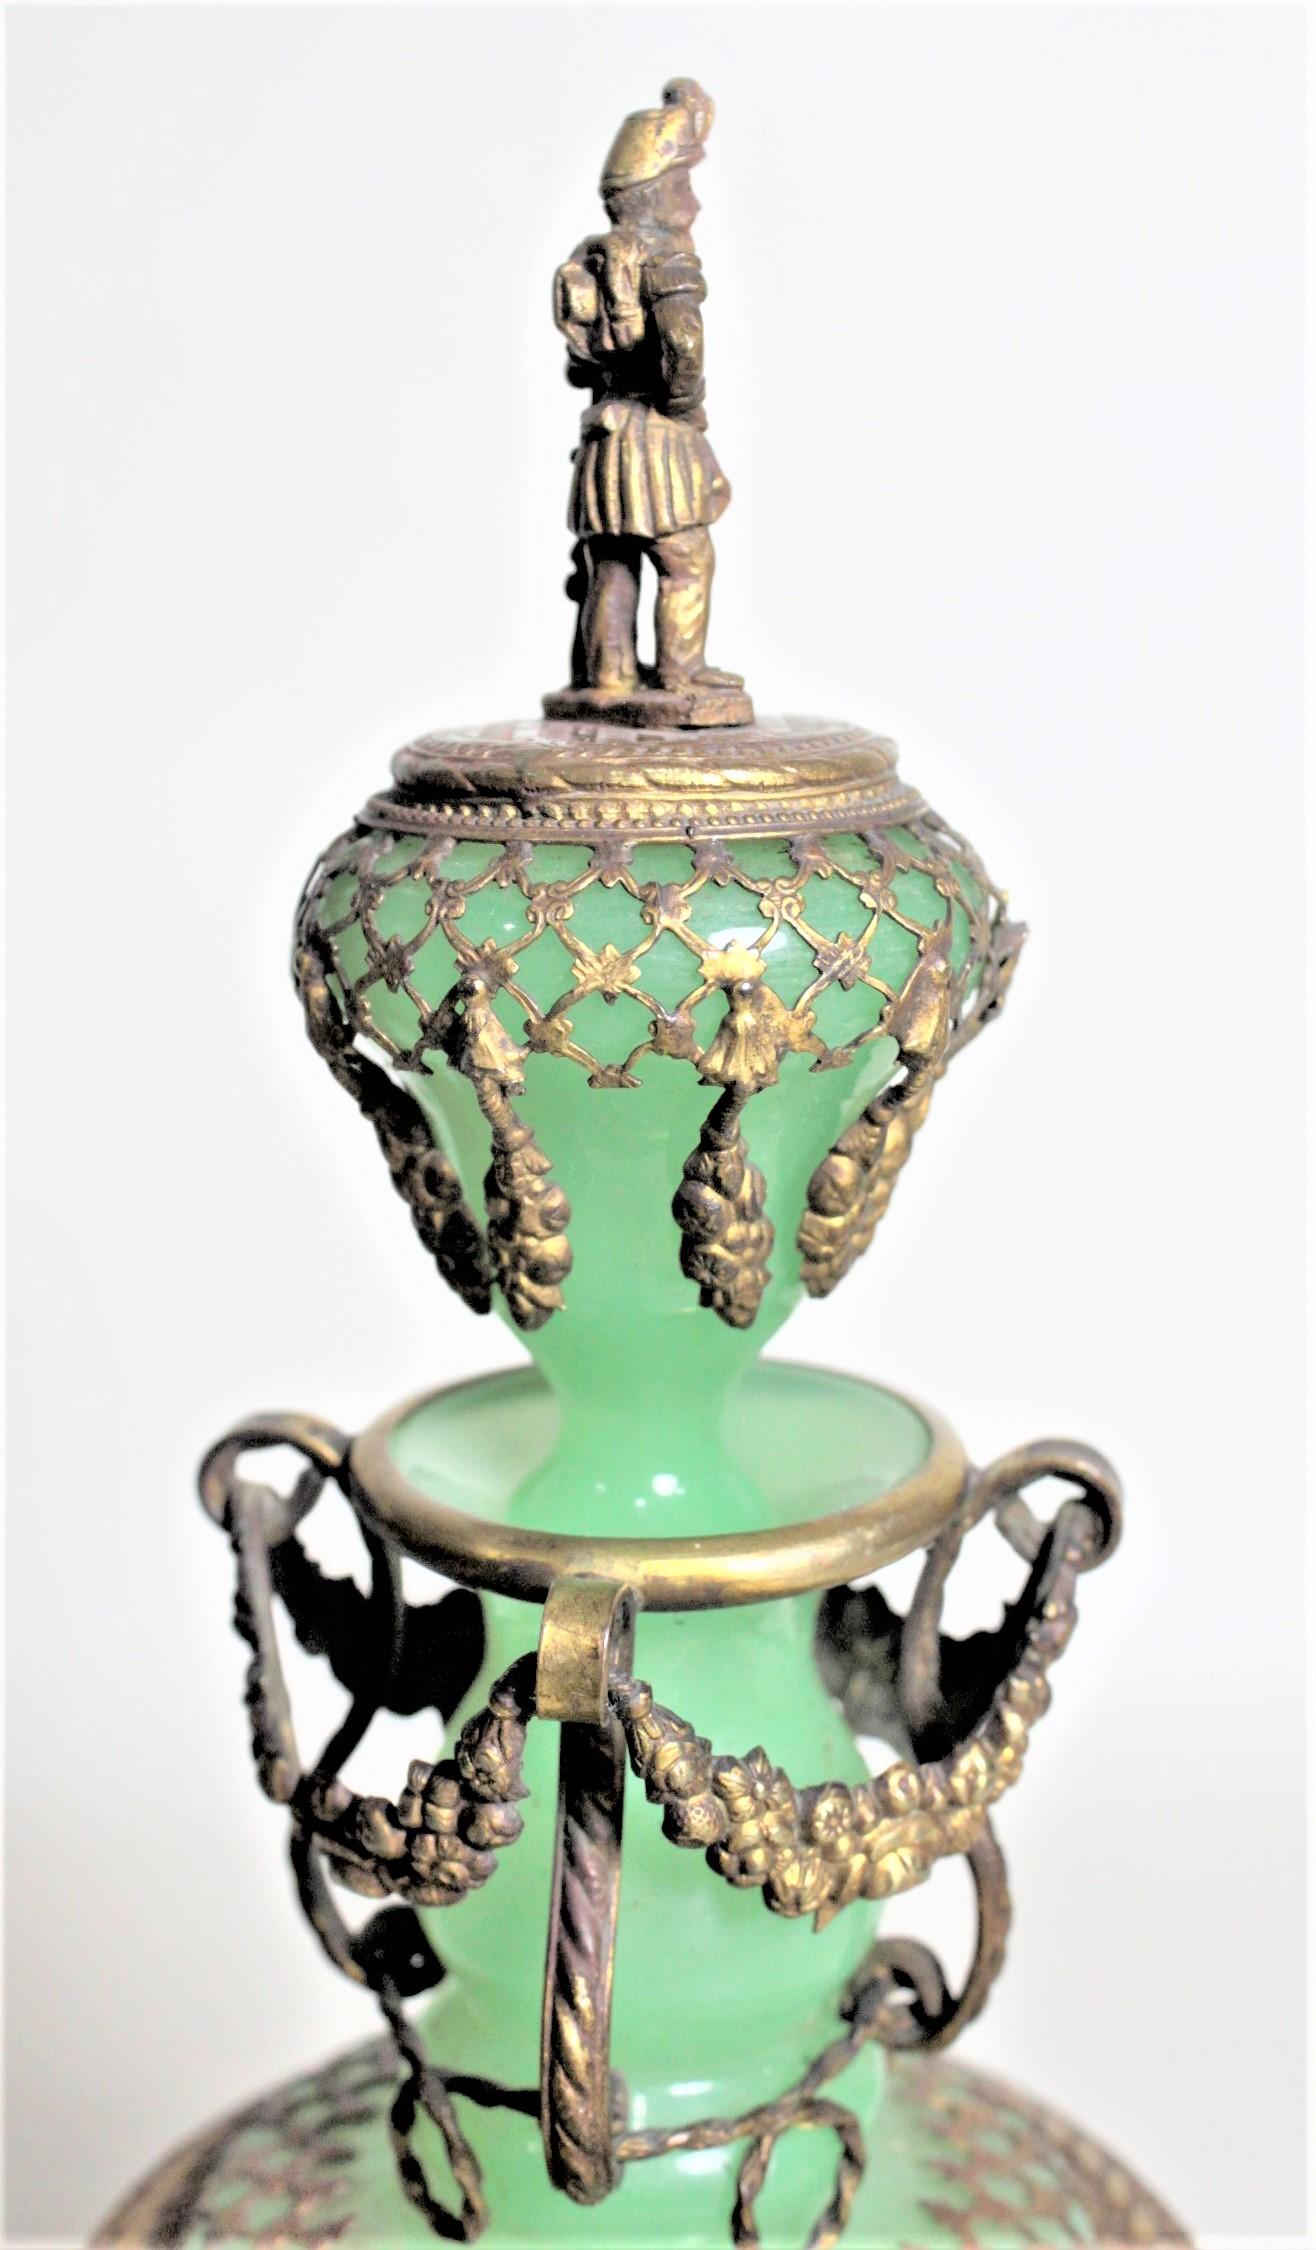 Large Antique Jadeite Glass Perfume Bottle with Ornate Gilt Brass Top and Mounts In Good Condition For Sale In Hamilton, Ontario